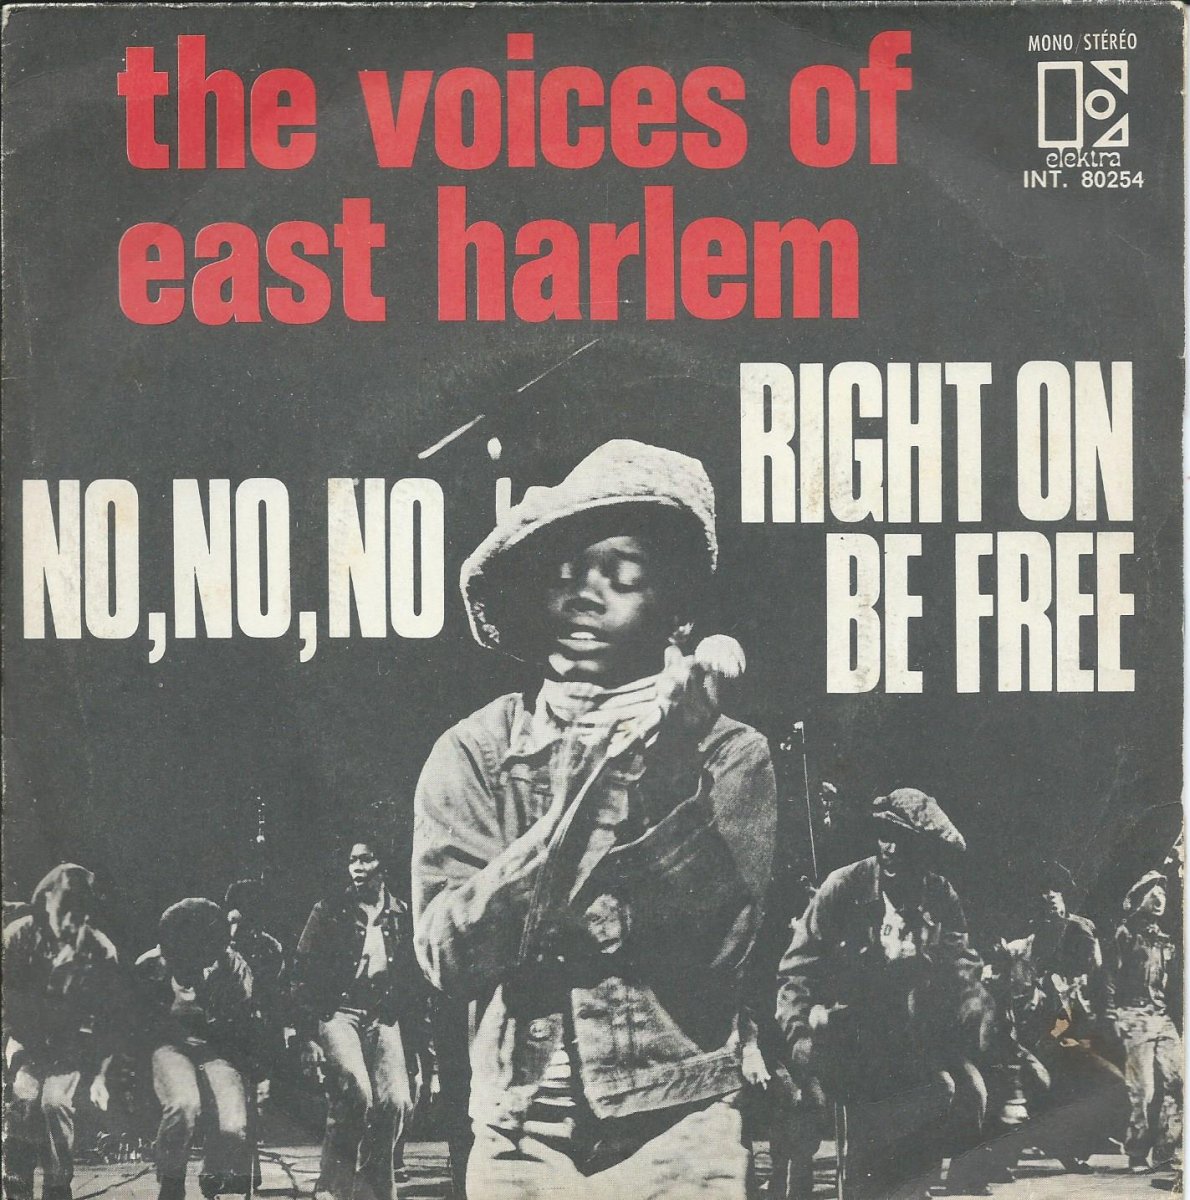 THE VOICES OF EAST HARLEM ‎/ NO, NO, NO / RIGHT ON BE FREE (7